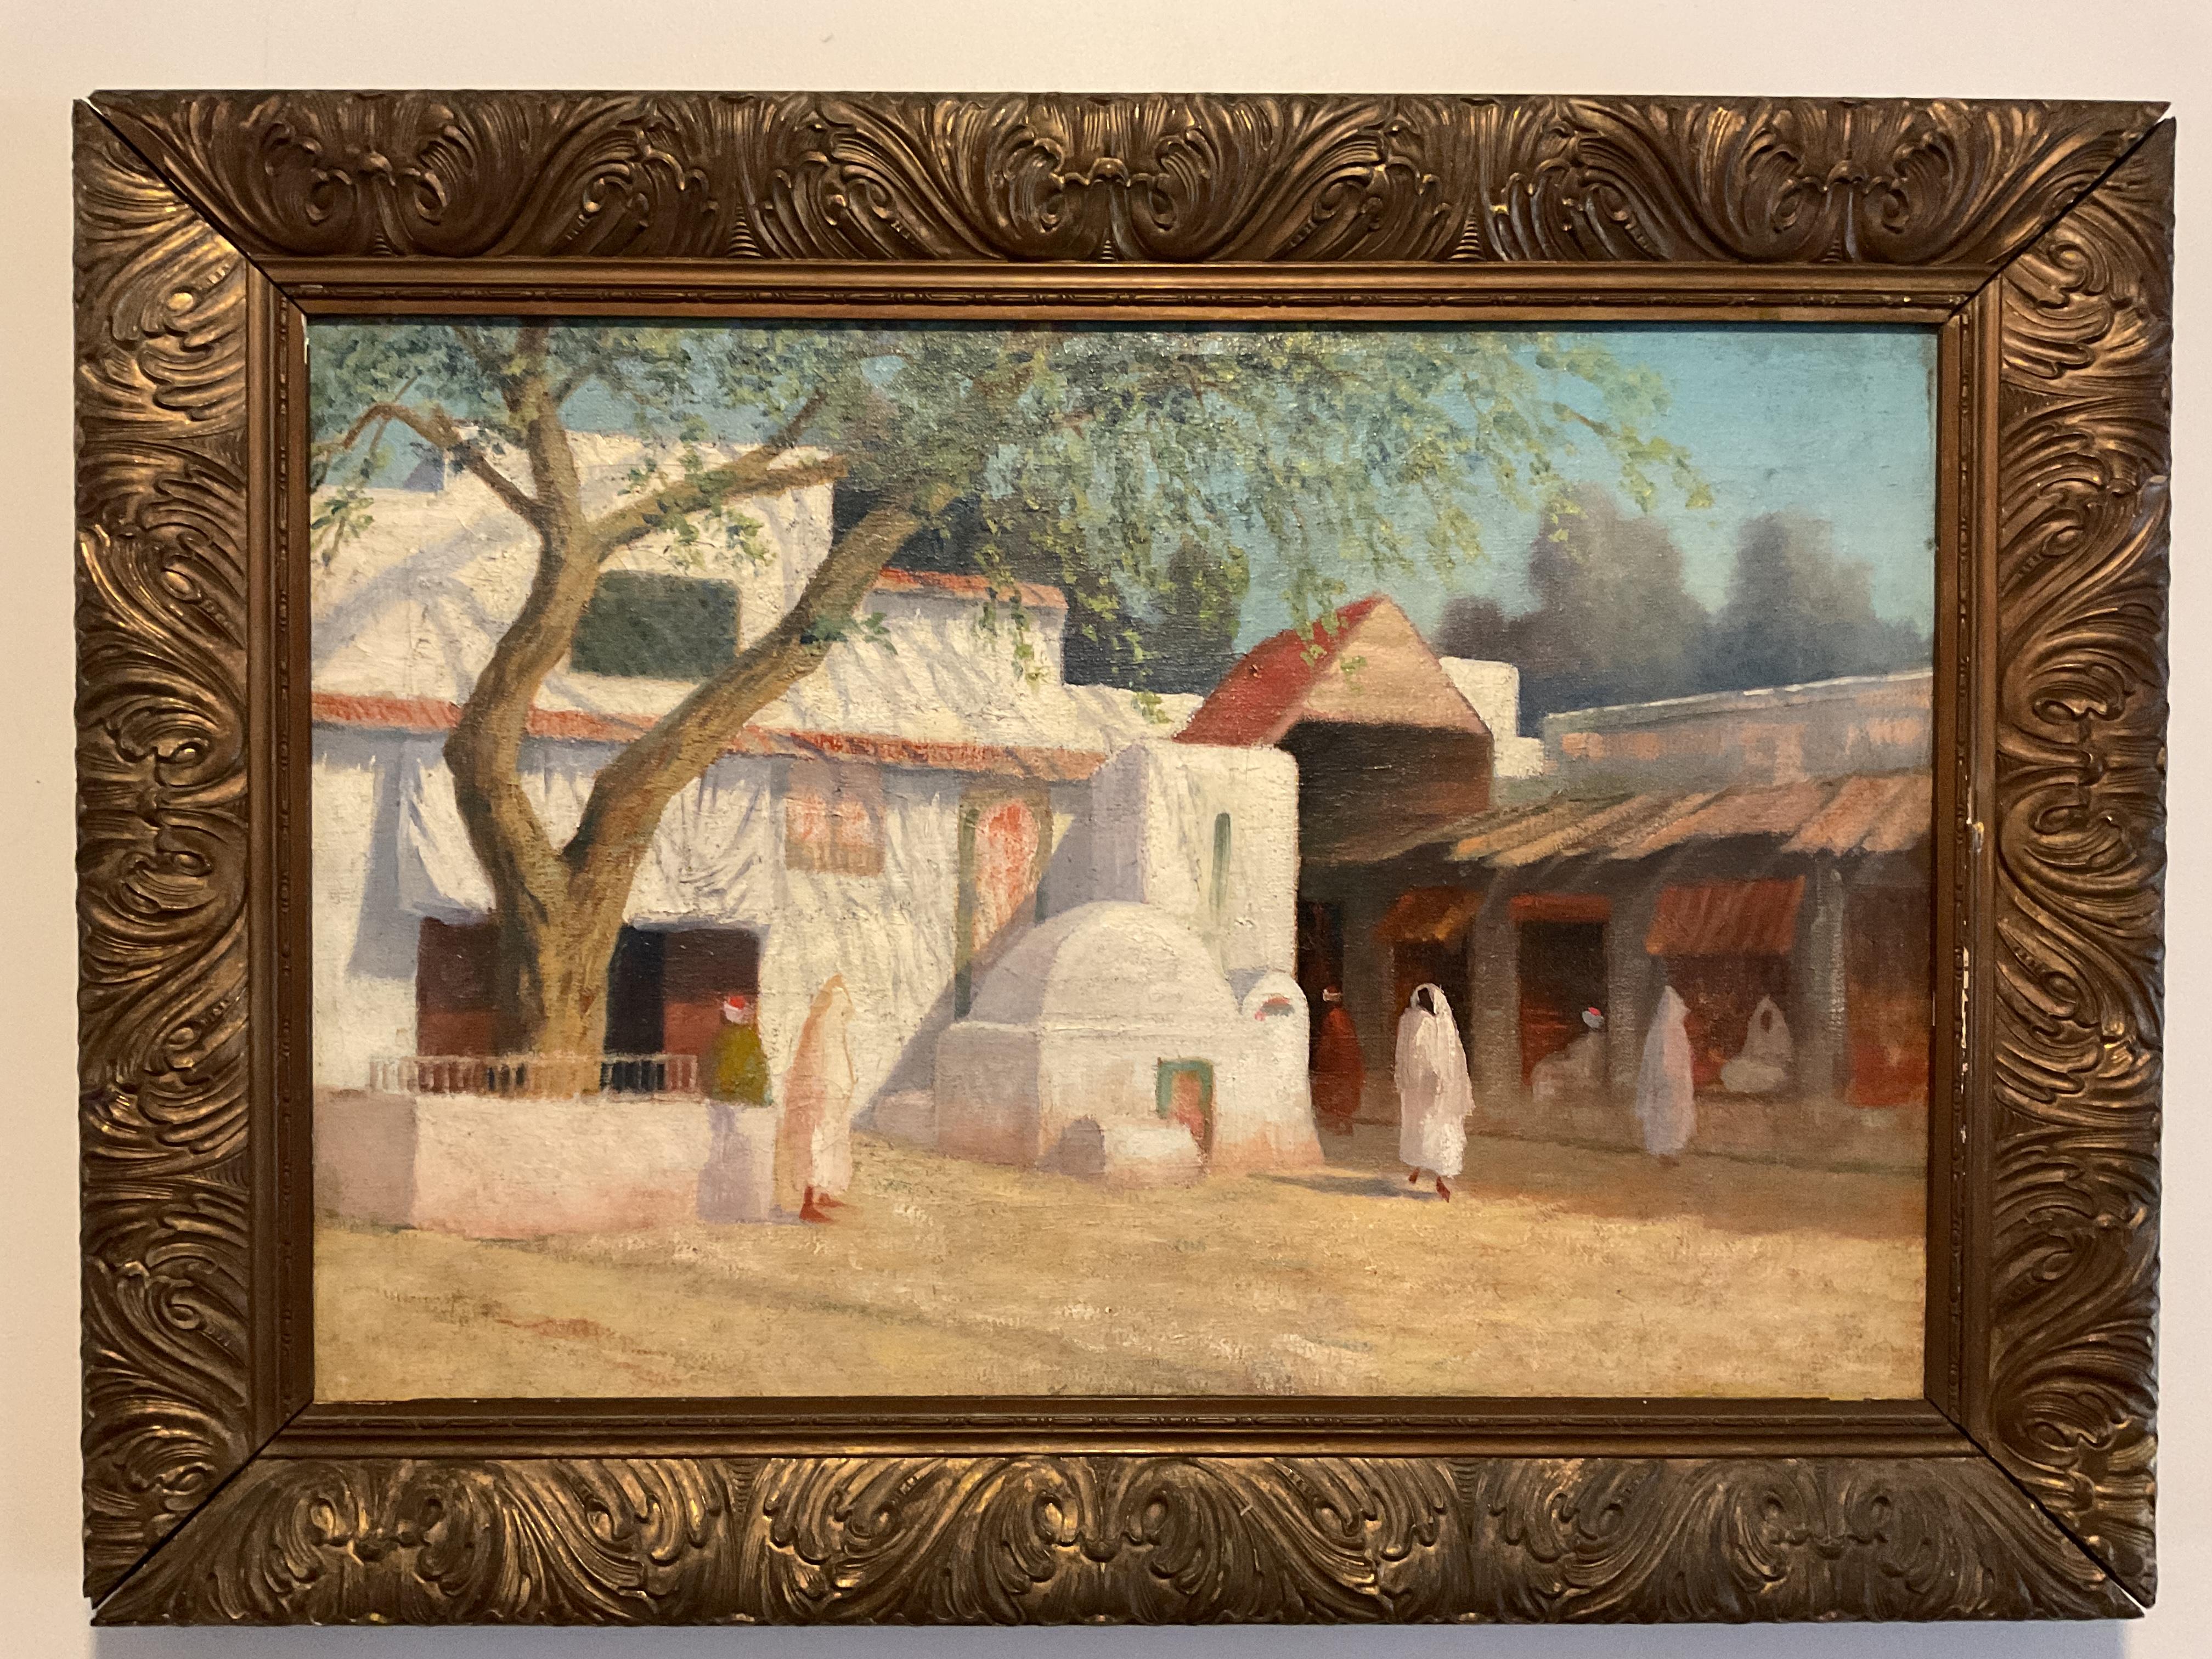 Unknown Landscape Painting - Vintage North African Market Oil on Canvas, ca 1930’s